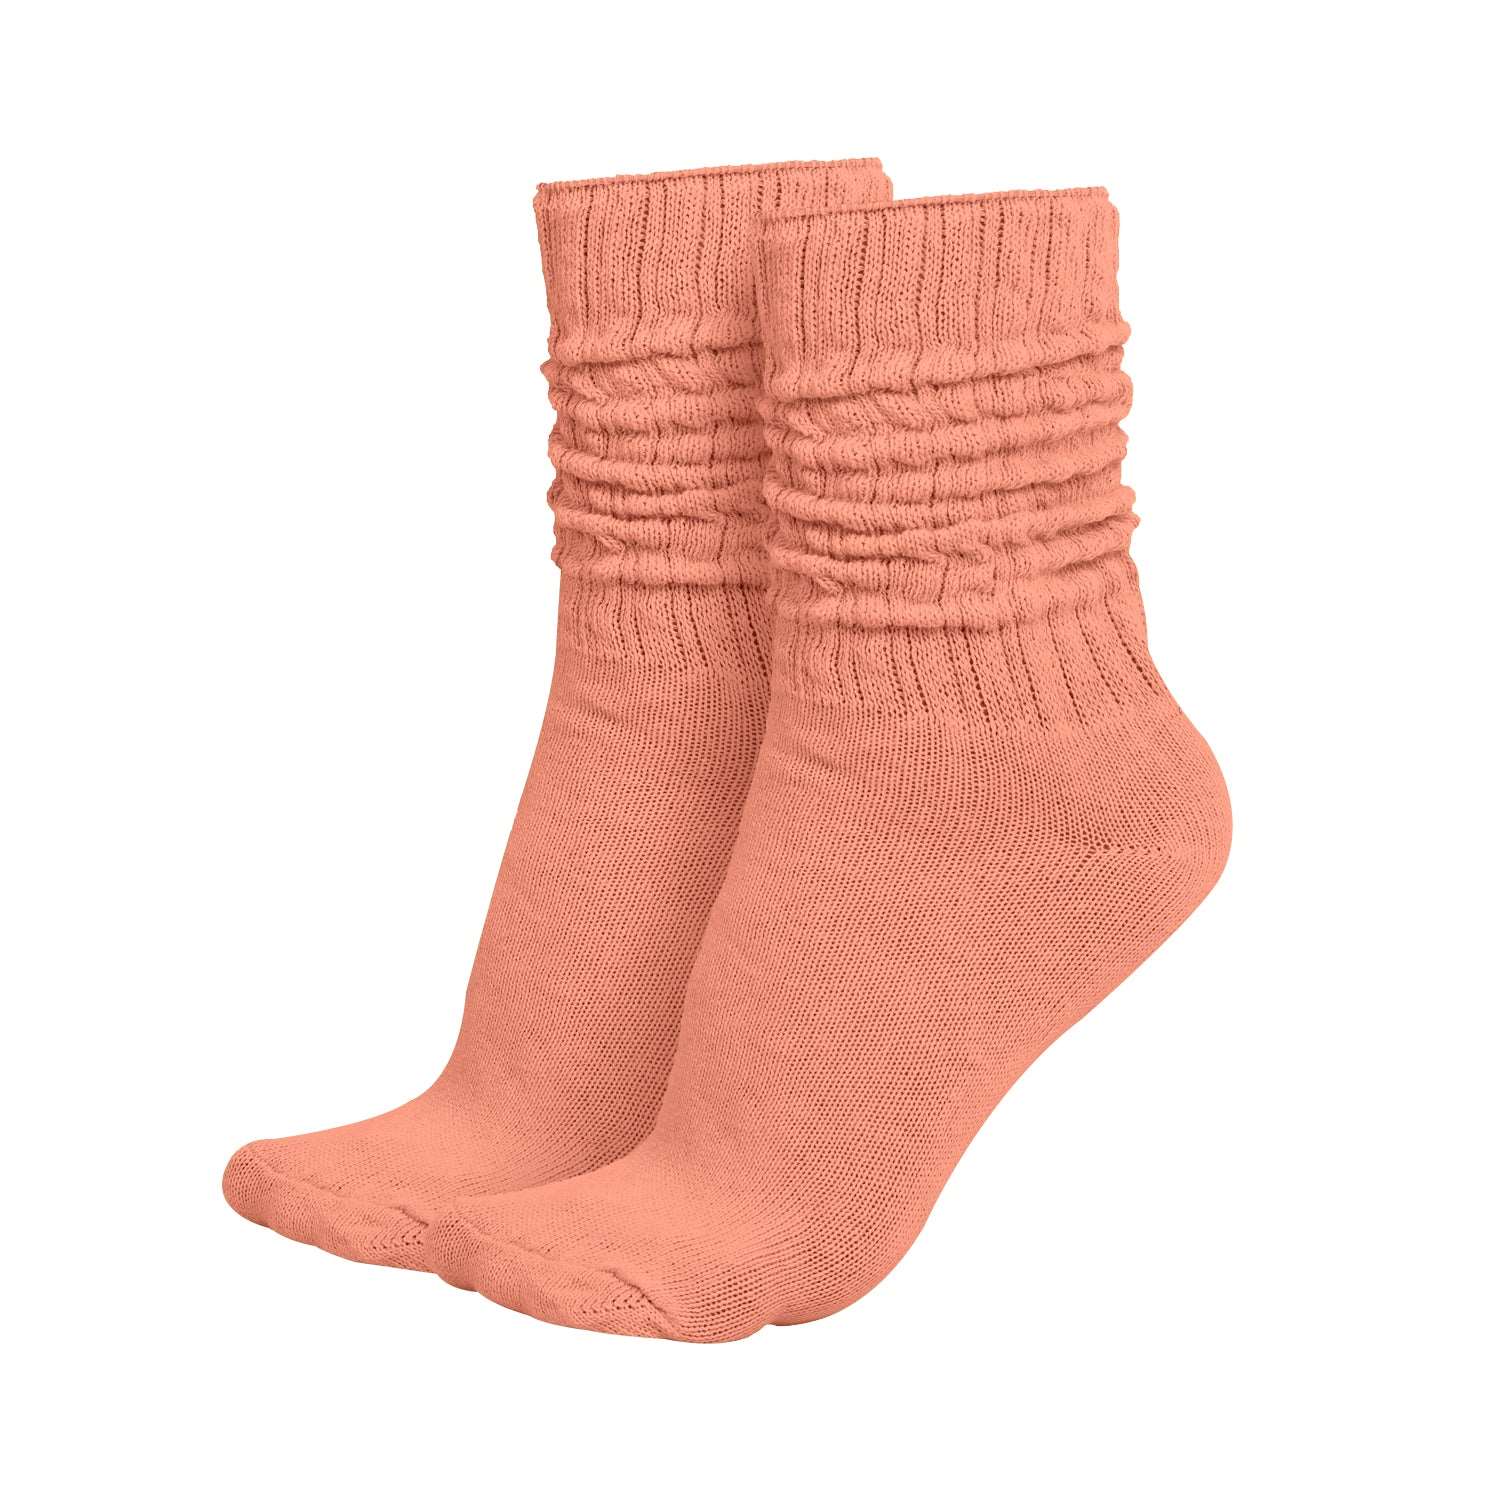 MDR Lightweight Cotton Slouch Socks For Women and Men 1 Pair Made in USA Size 9 to 11 (Peach)